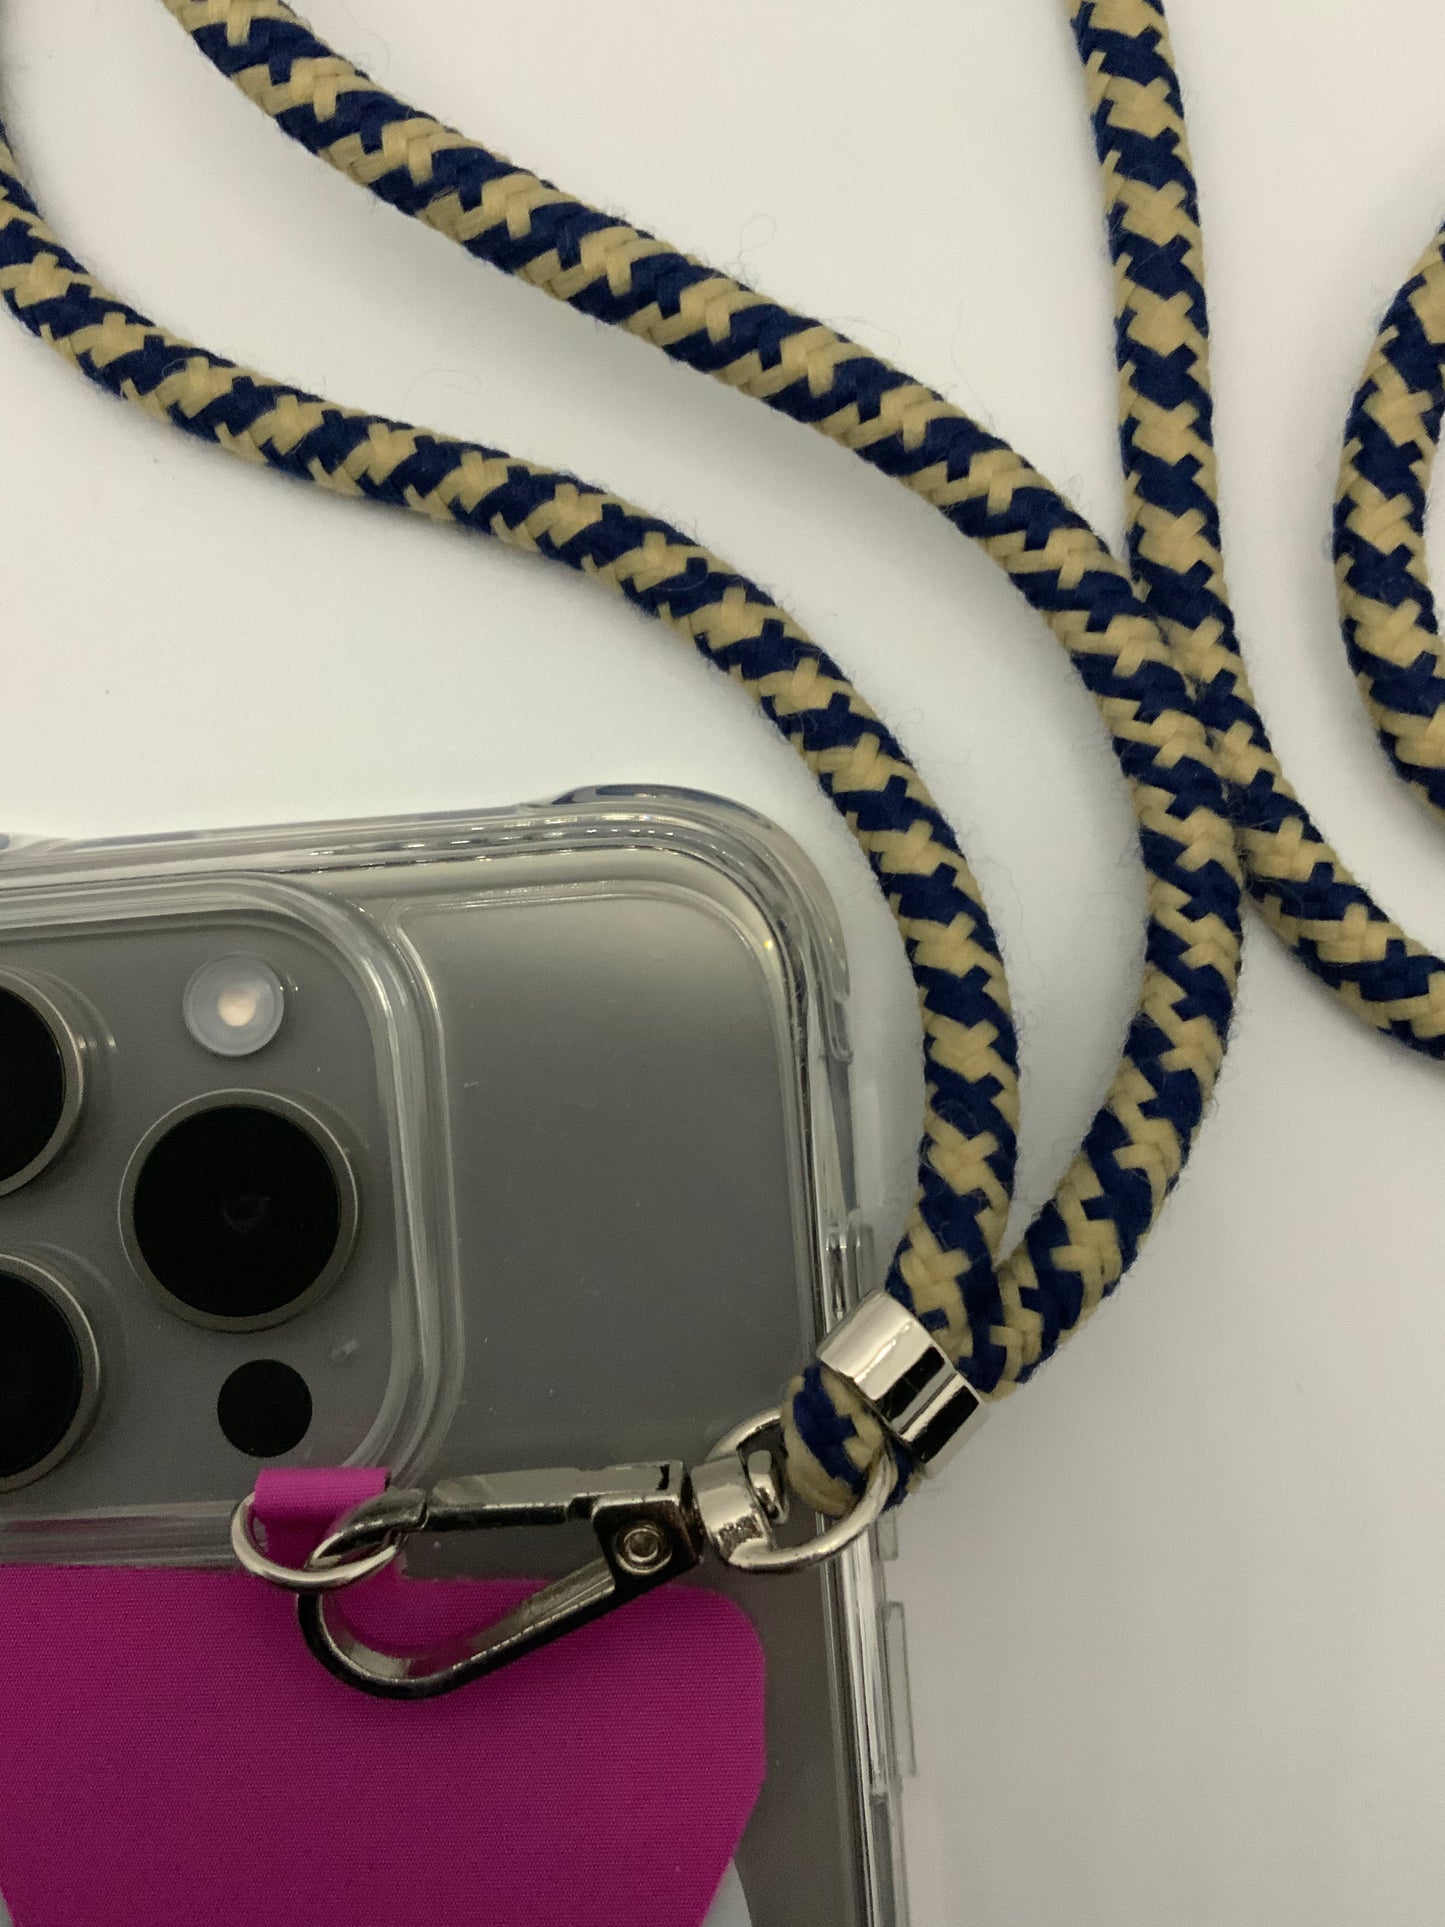 Be My AI: The picture shows a close-up of a woven lanyard and a clear phone case. The lanyard is made of a fabric material and has a pattern of alternating navy blue and beige colors. The lanyard is attached to a silver metal clasp, which is hooked onto the corner of a clear phone case. The phone case has a pink card holder on the back and is designed for a phone with three camera lenses and a flash. The background of the picture is white.